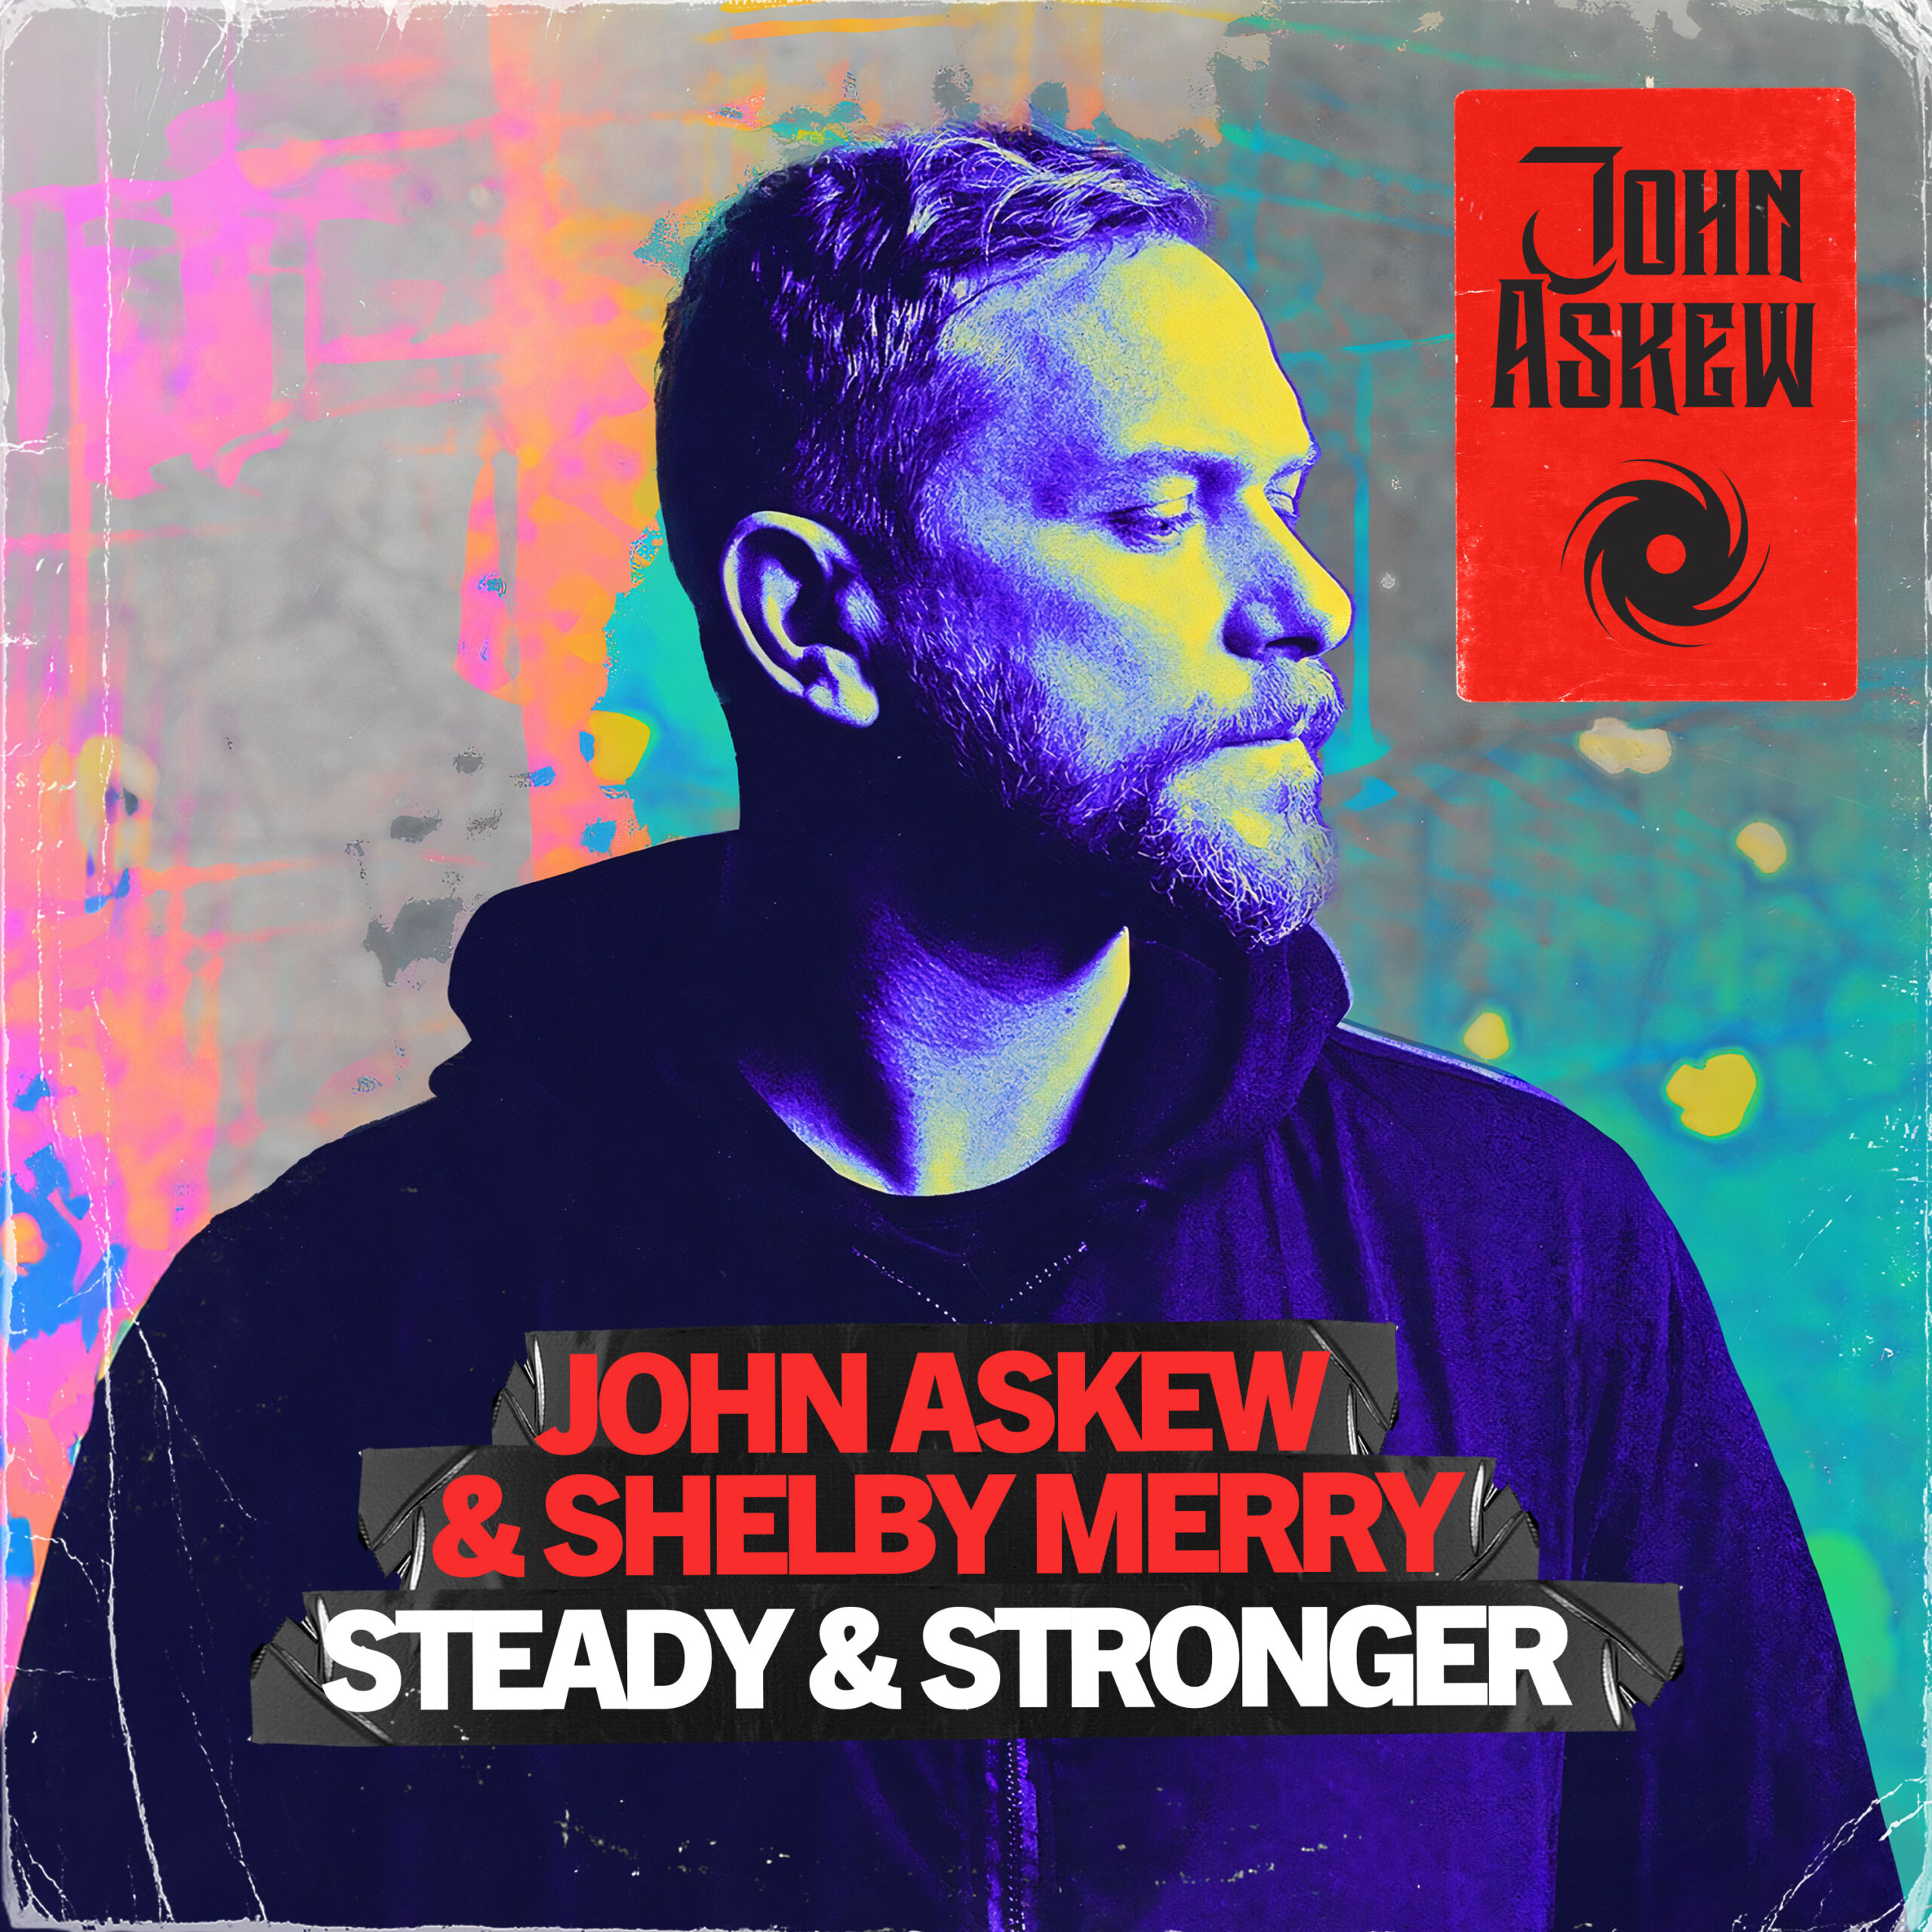 John Askew and Shelby Merry presents Steady And Stronger on Black Hole Recordings